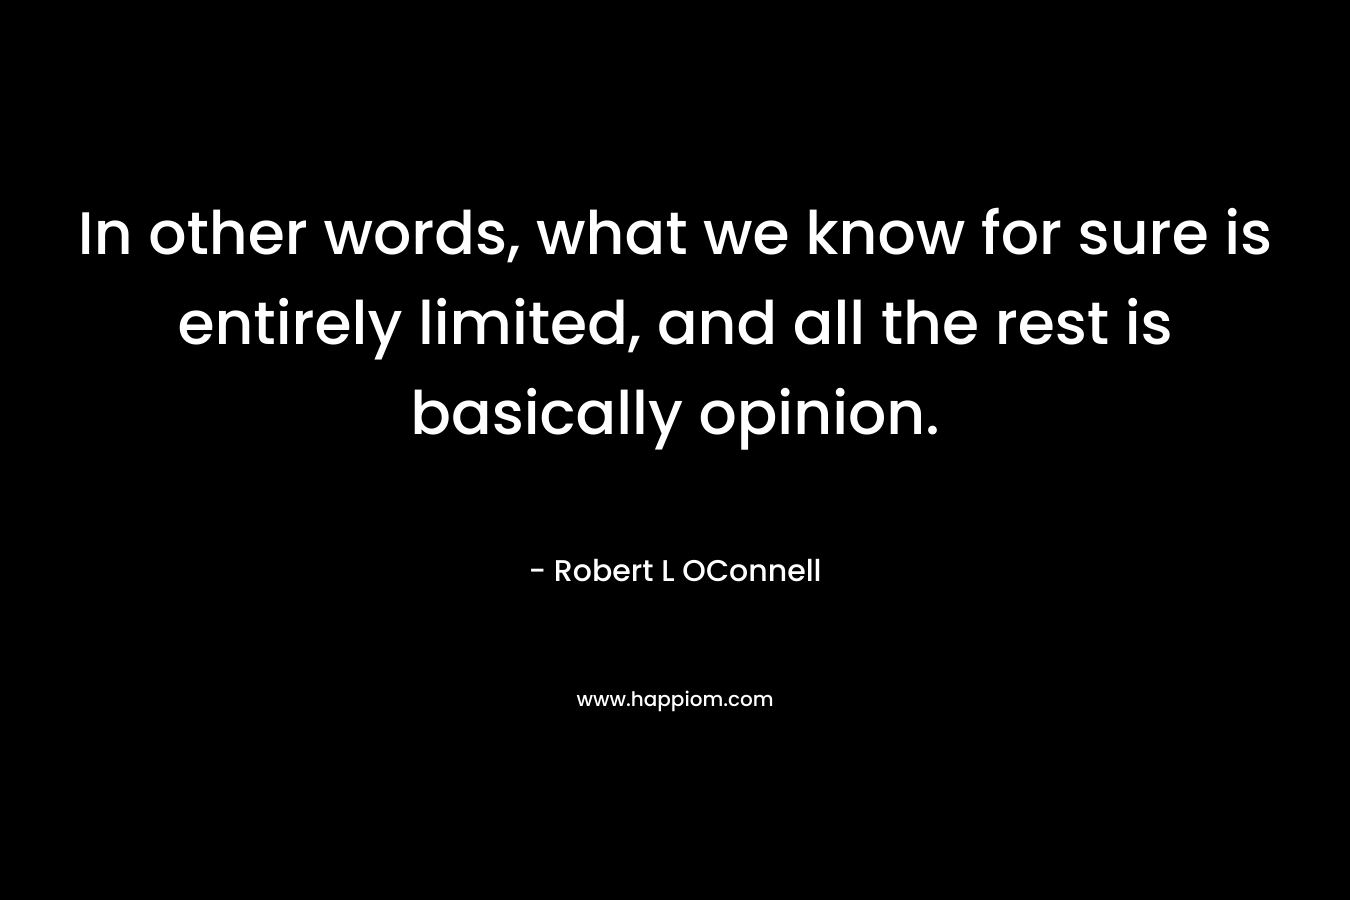 In other words, what we know for sure is entirely limited, and all the rest is basically opinion. – Robert L OConnell